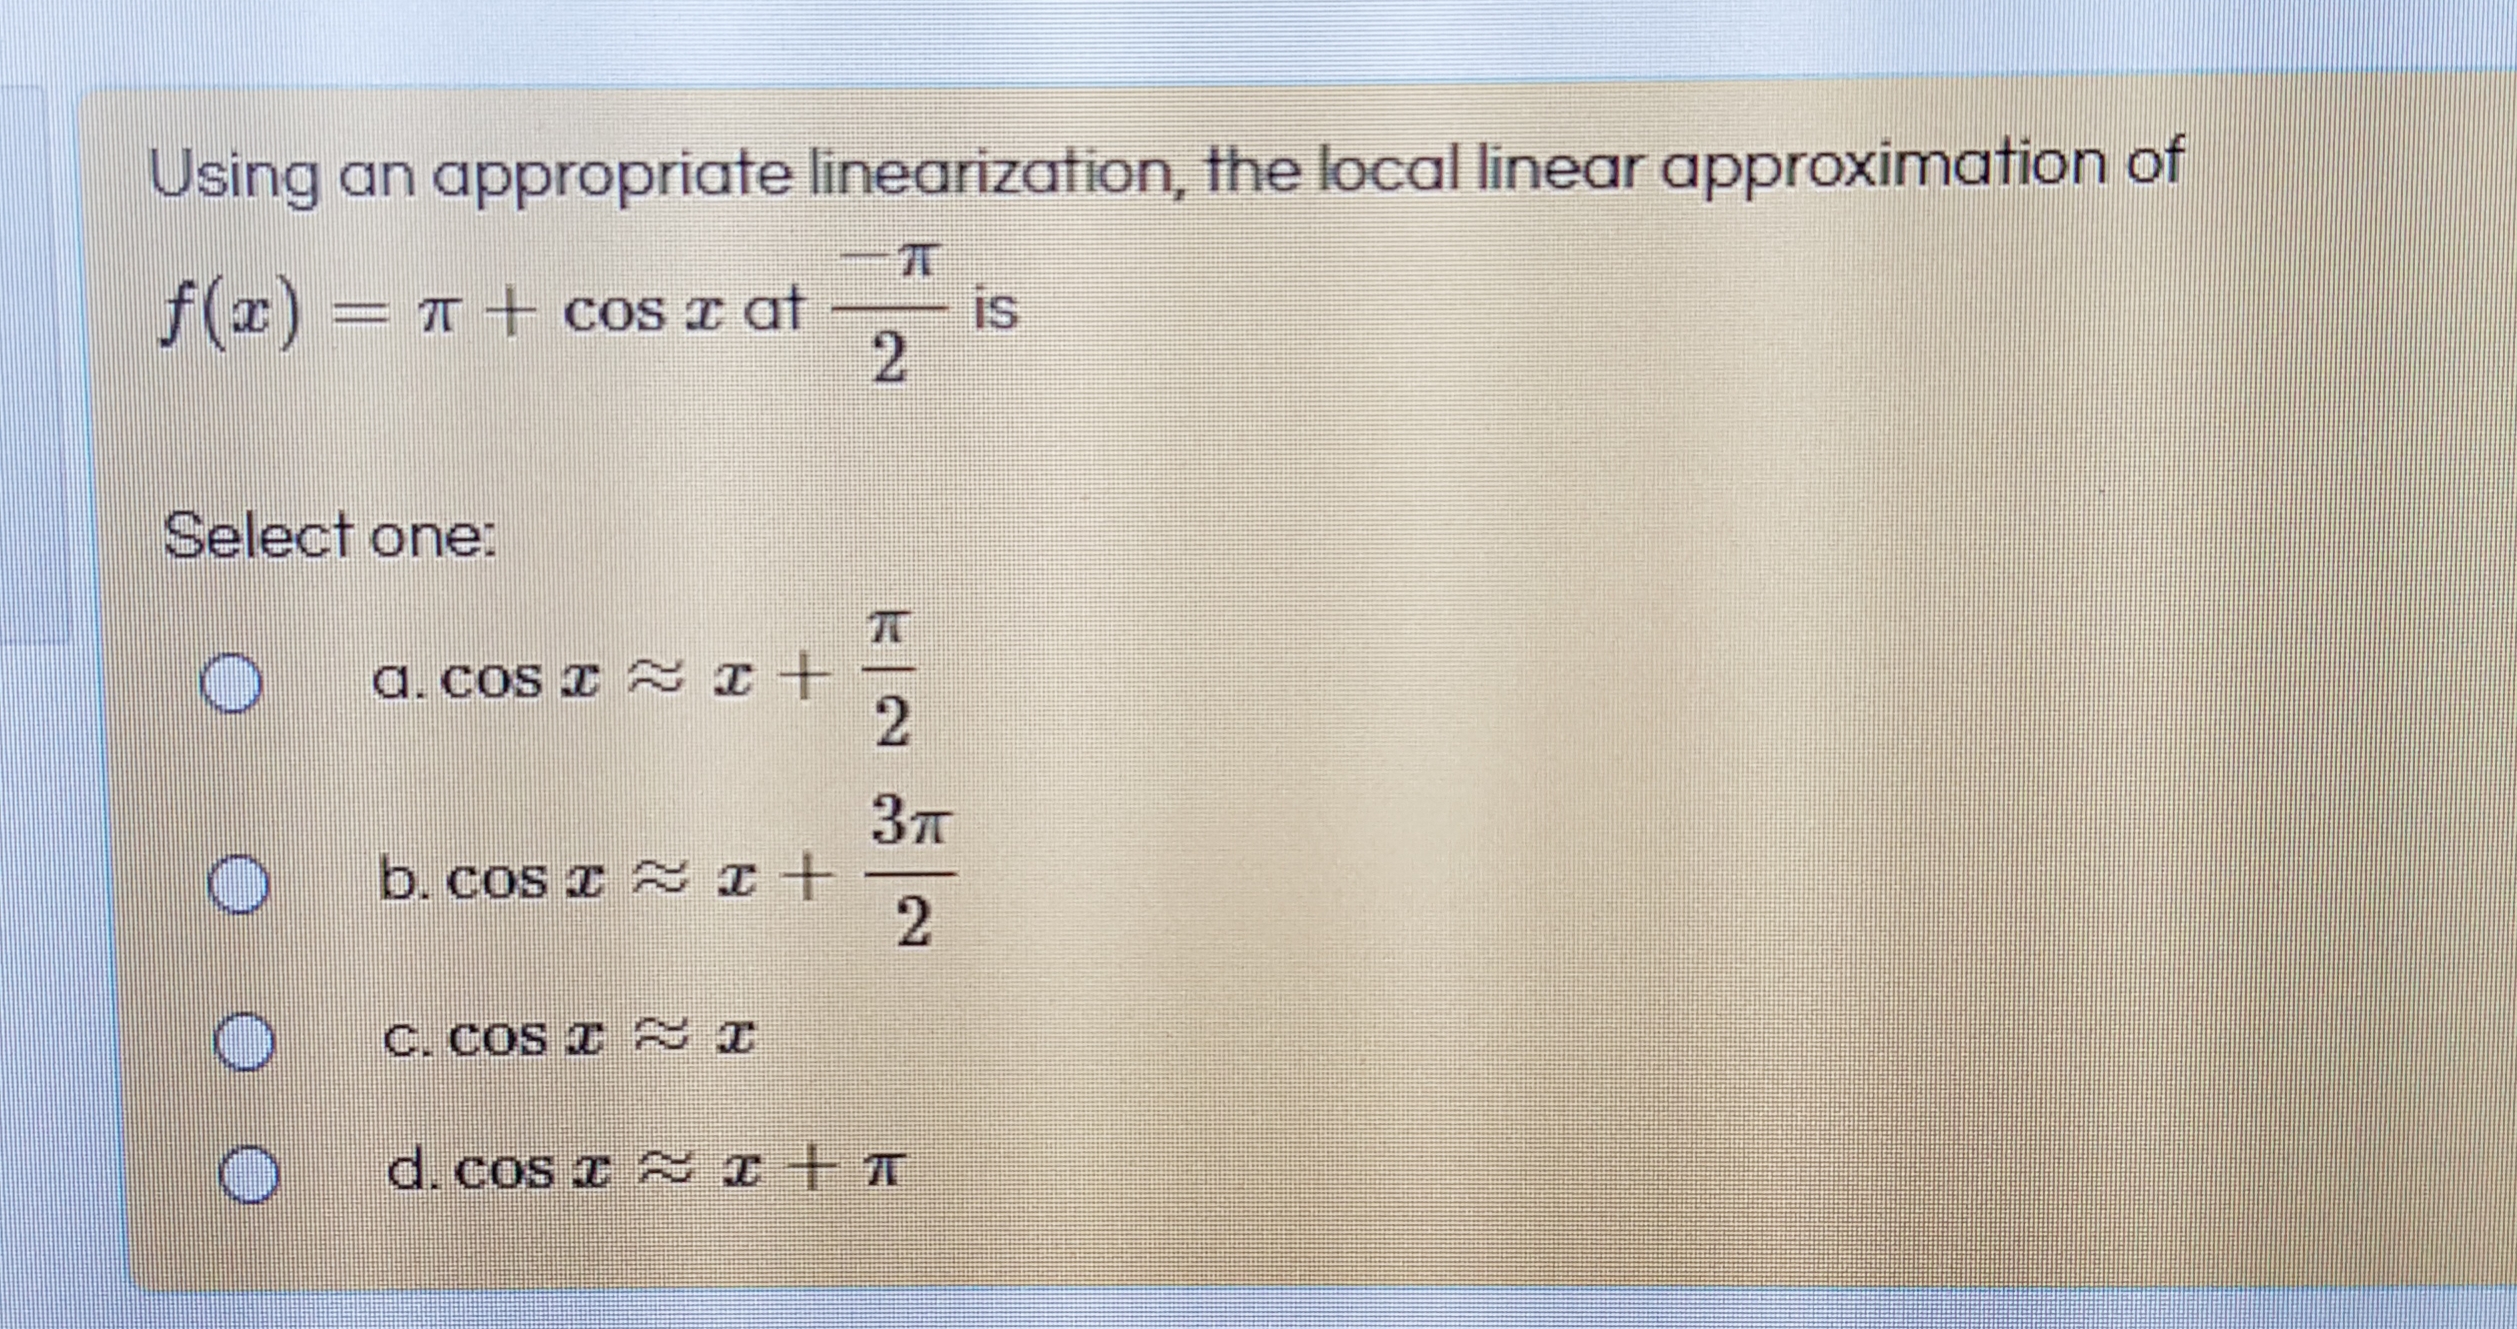 Using an appropriate linearization, the local linear approximation of
is
f(x) = T+ cos r at
2.
